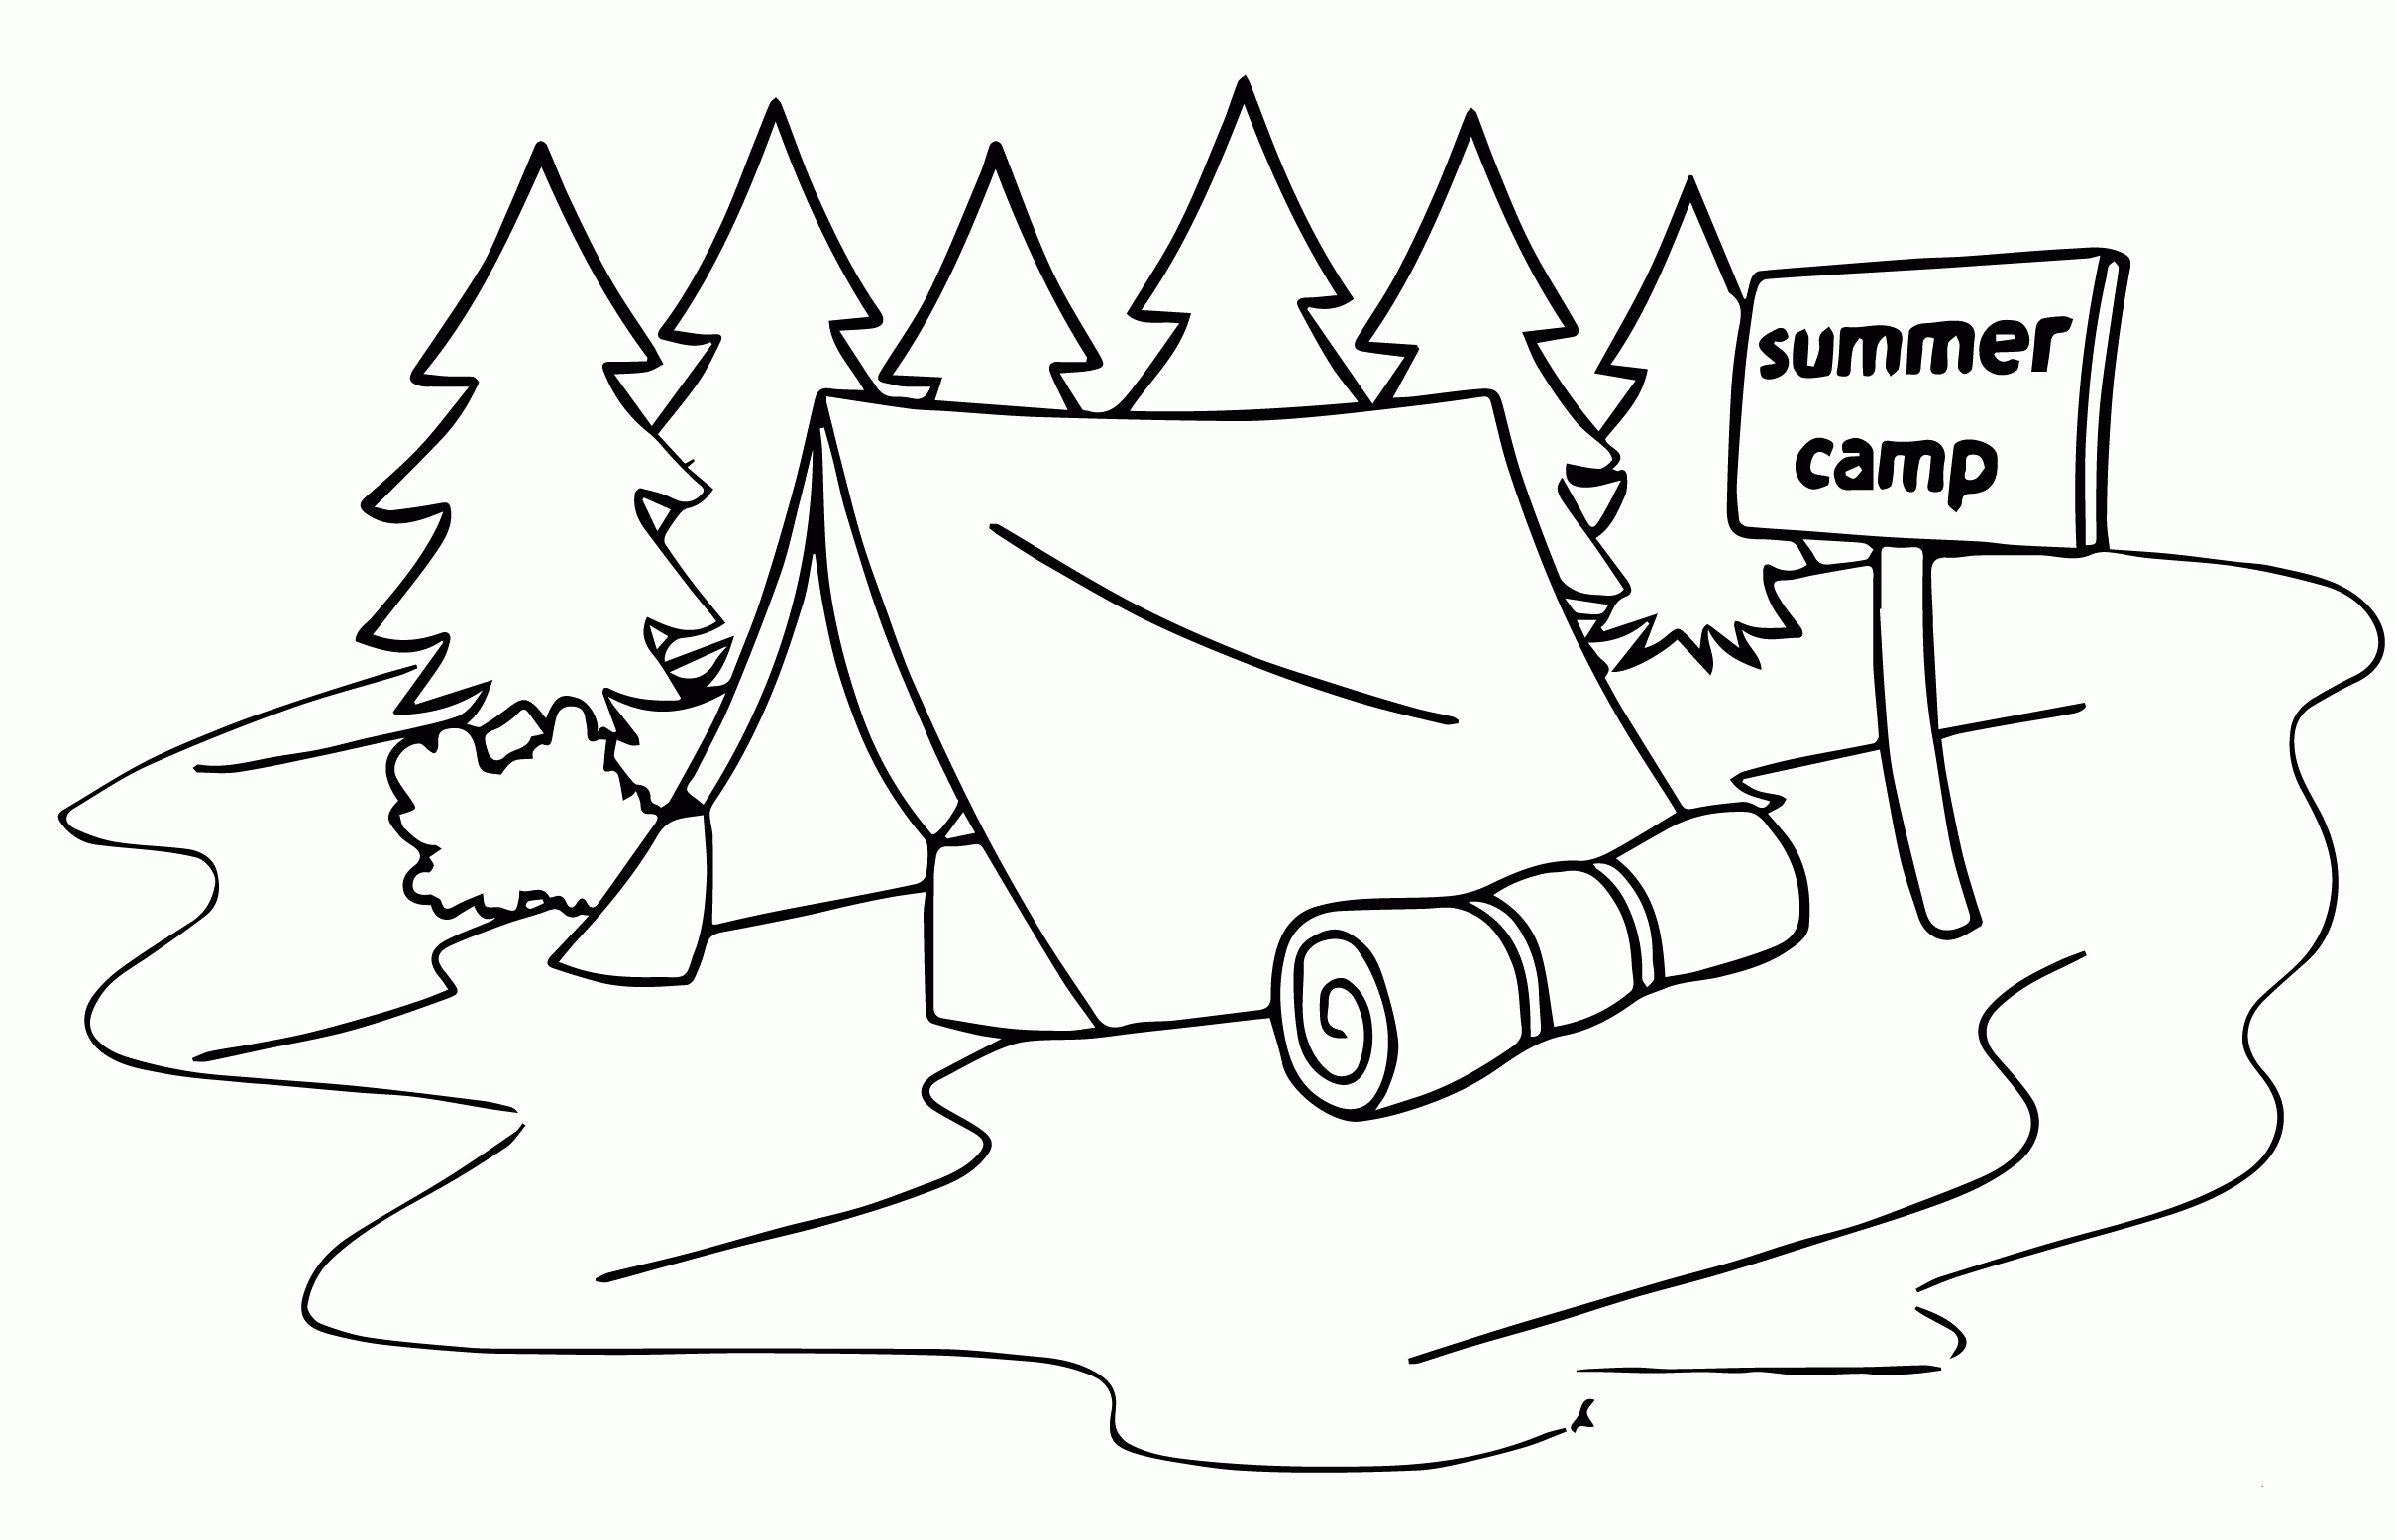 Summer Camp Tent Sleeping Bag Coloring Page